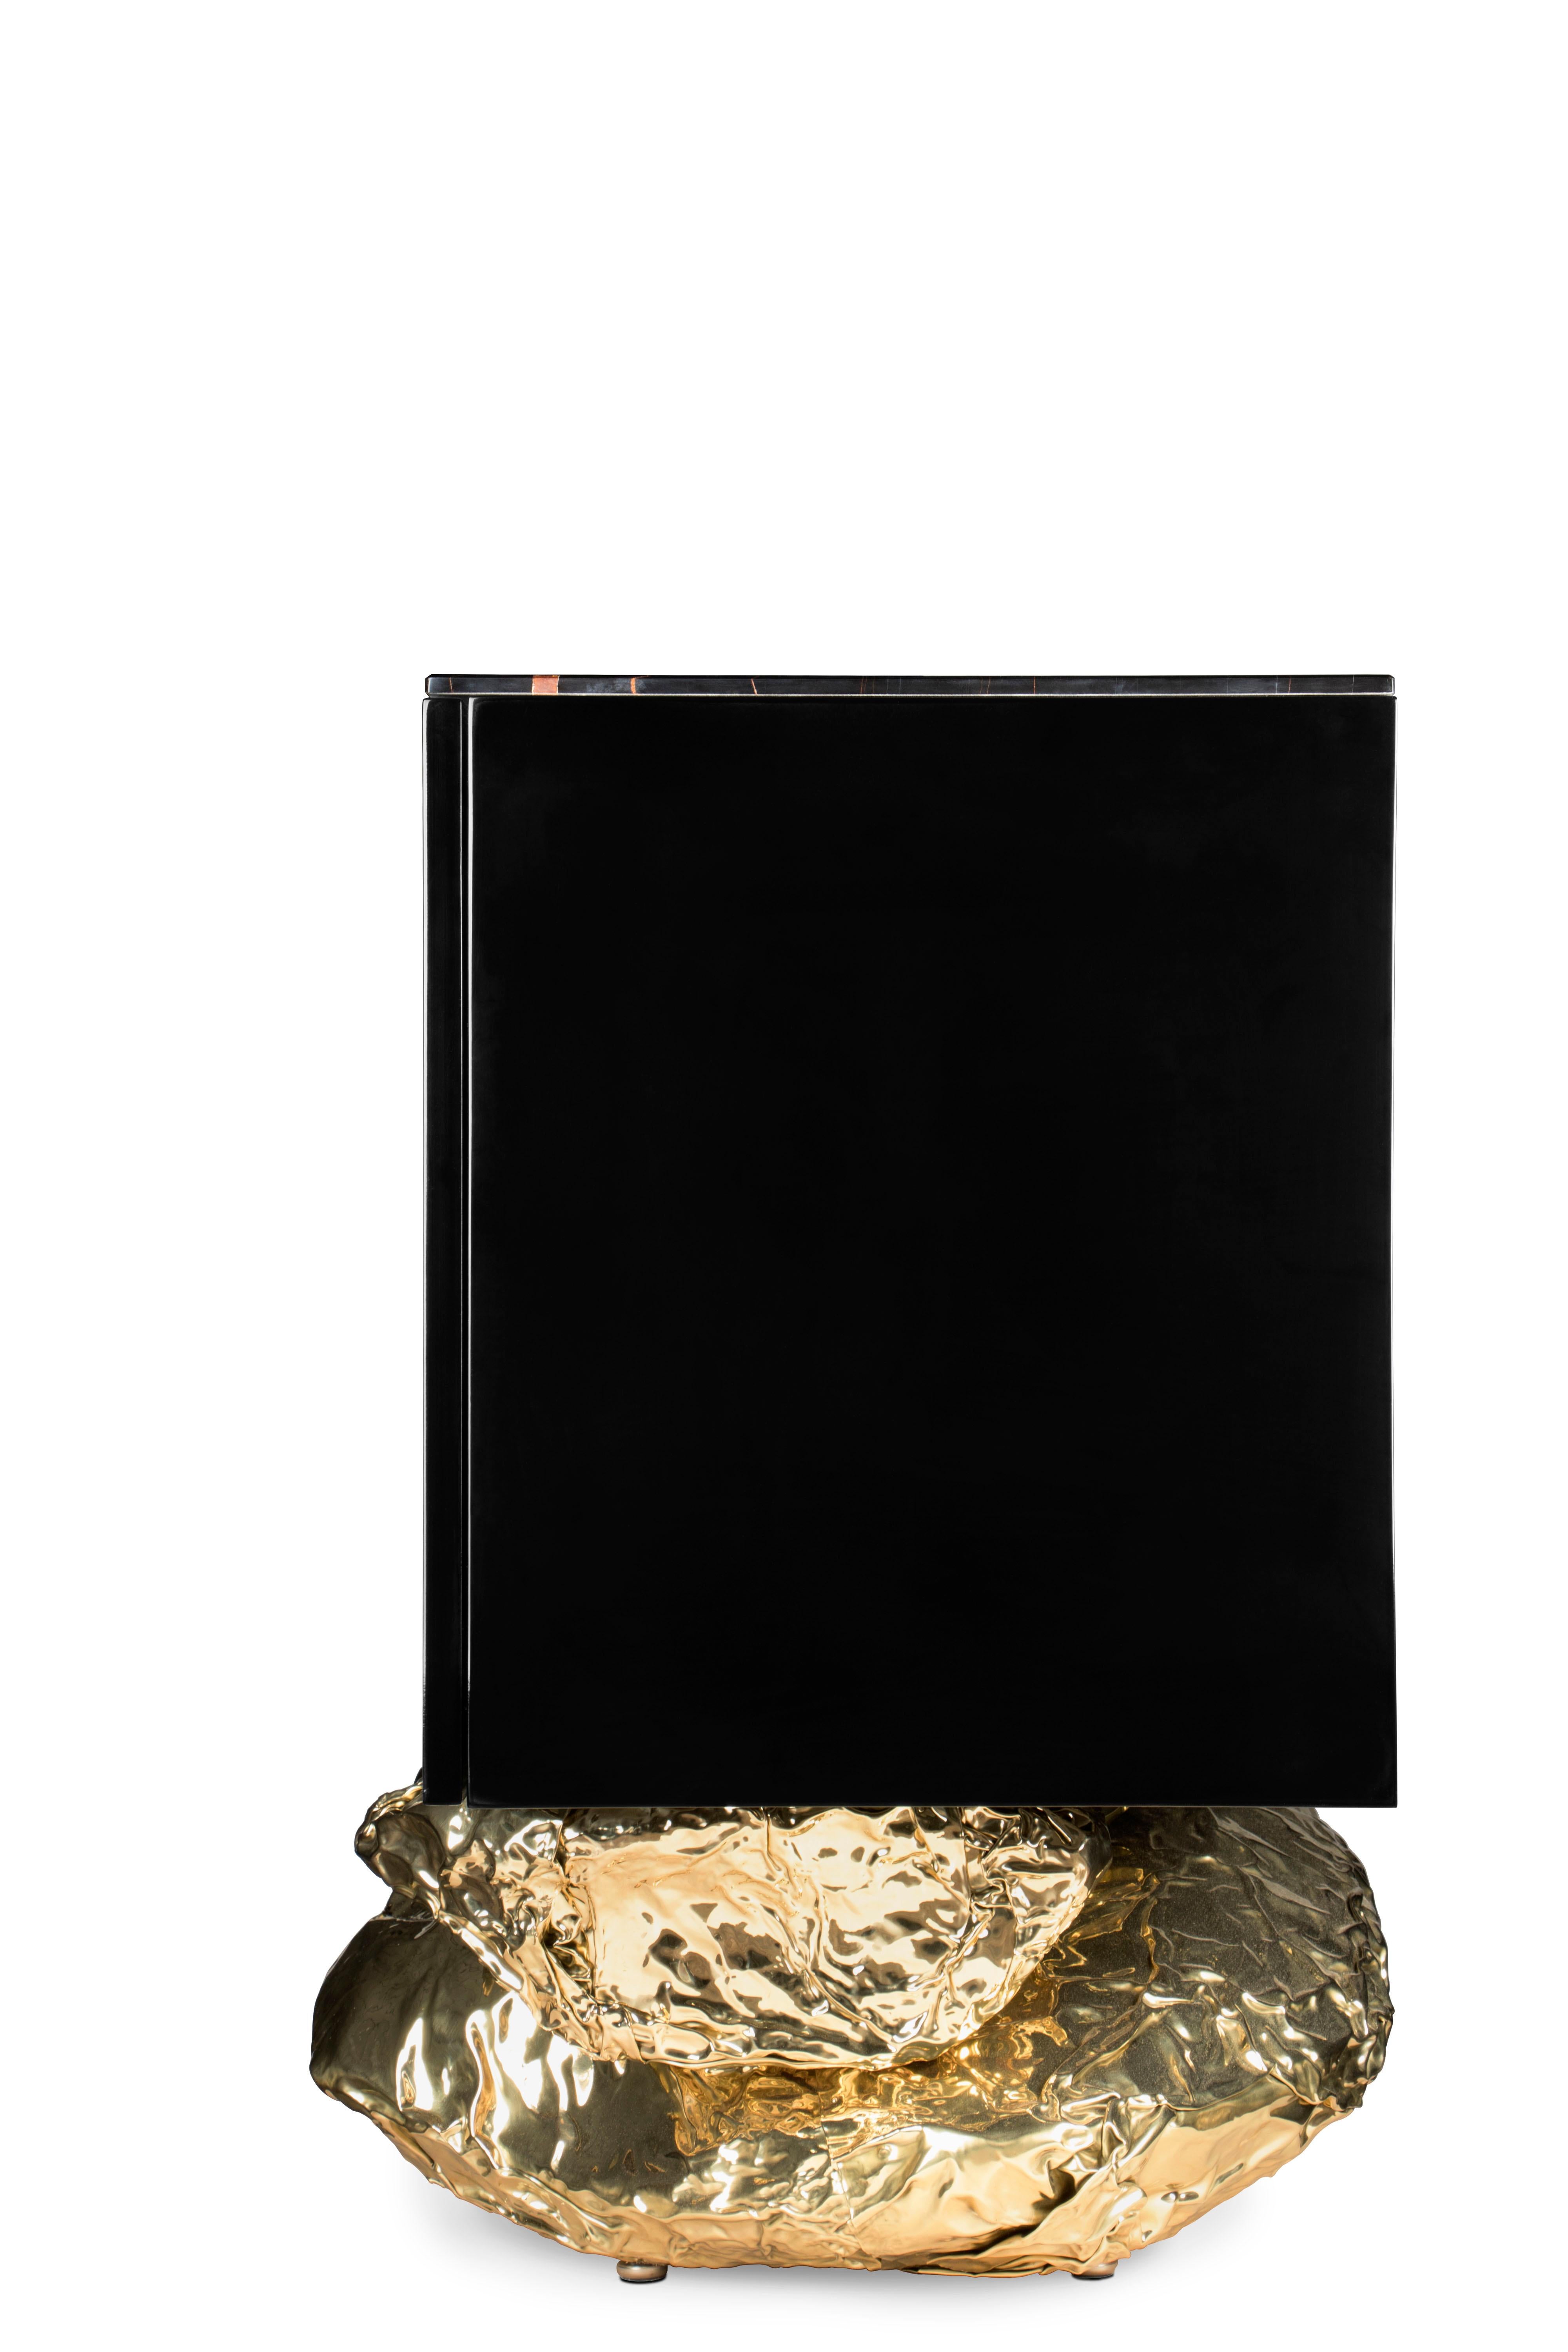 Modern Contemporary Angra Black with Brass Base Sideboard by Boca do Lobo For Sale 2